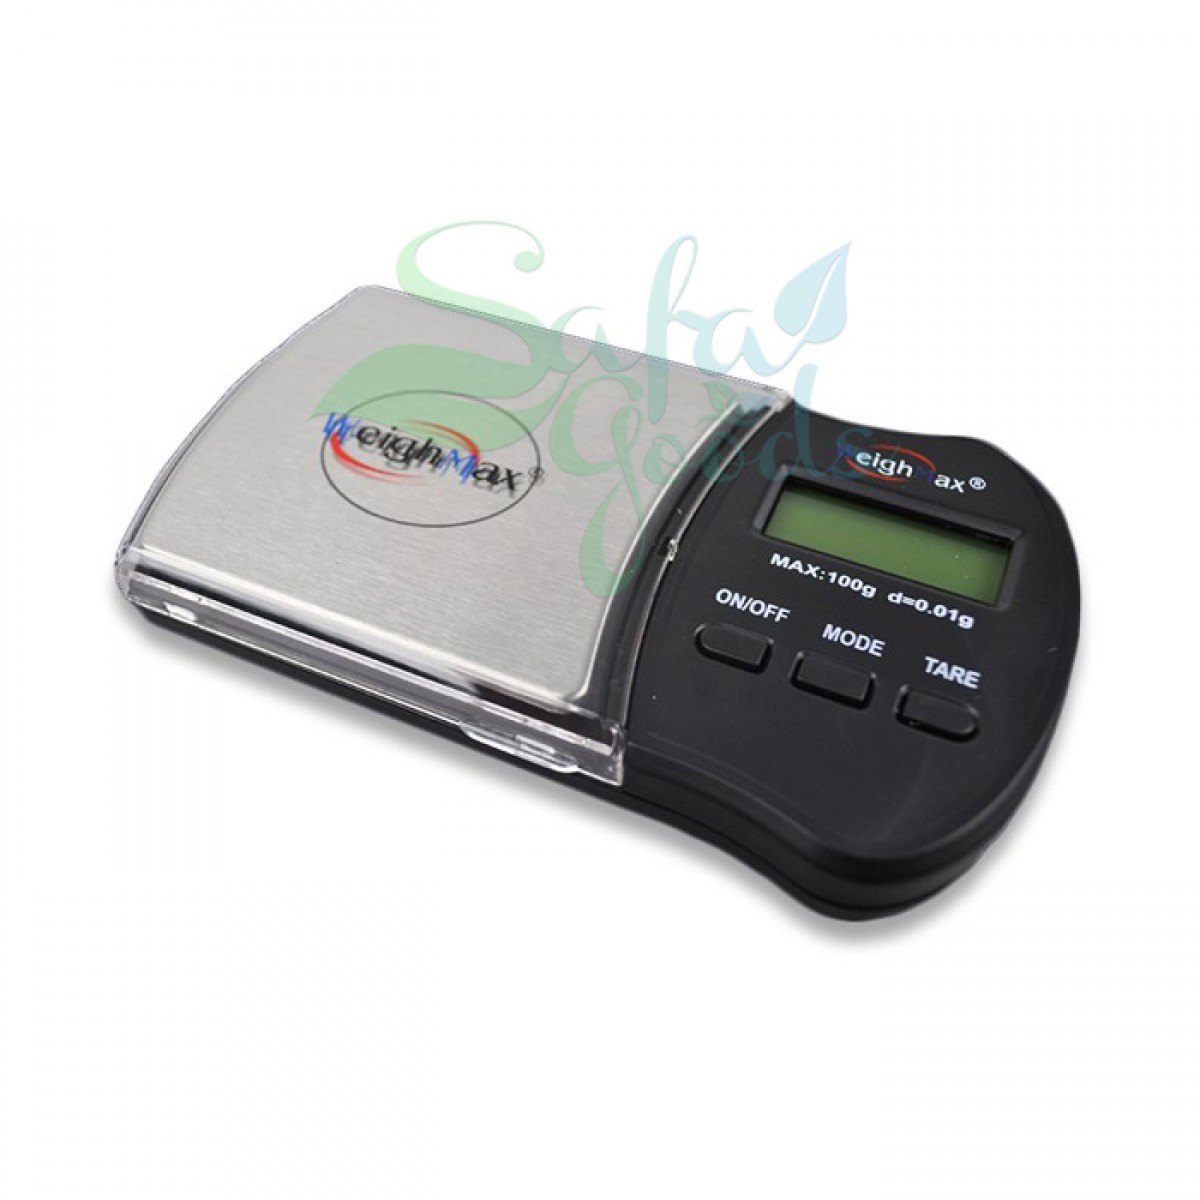 Digital Pocket Scale - WeighMax Scale 0.01g (PX100C)